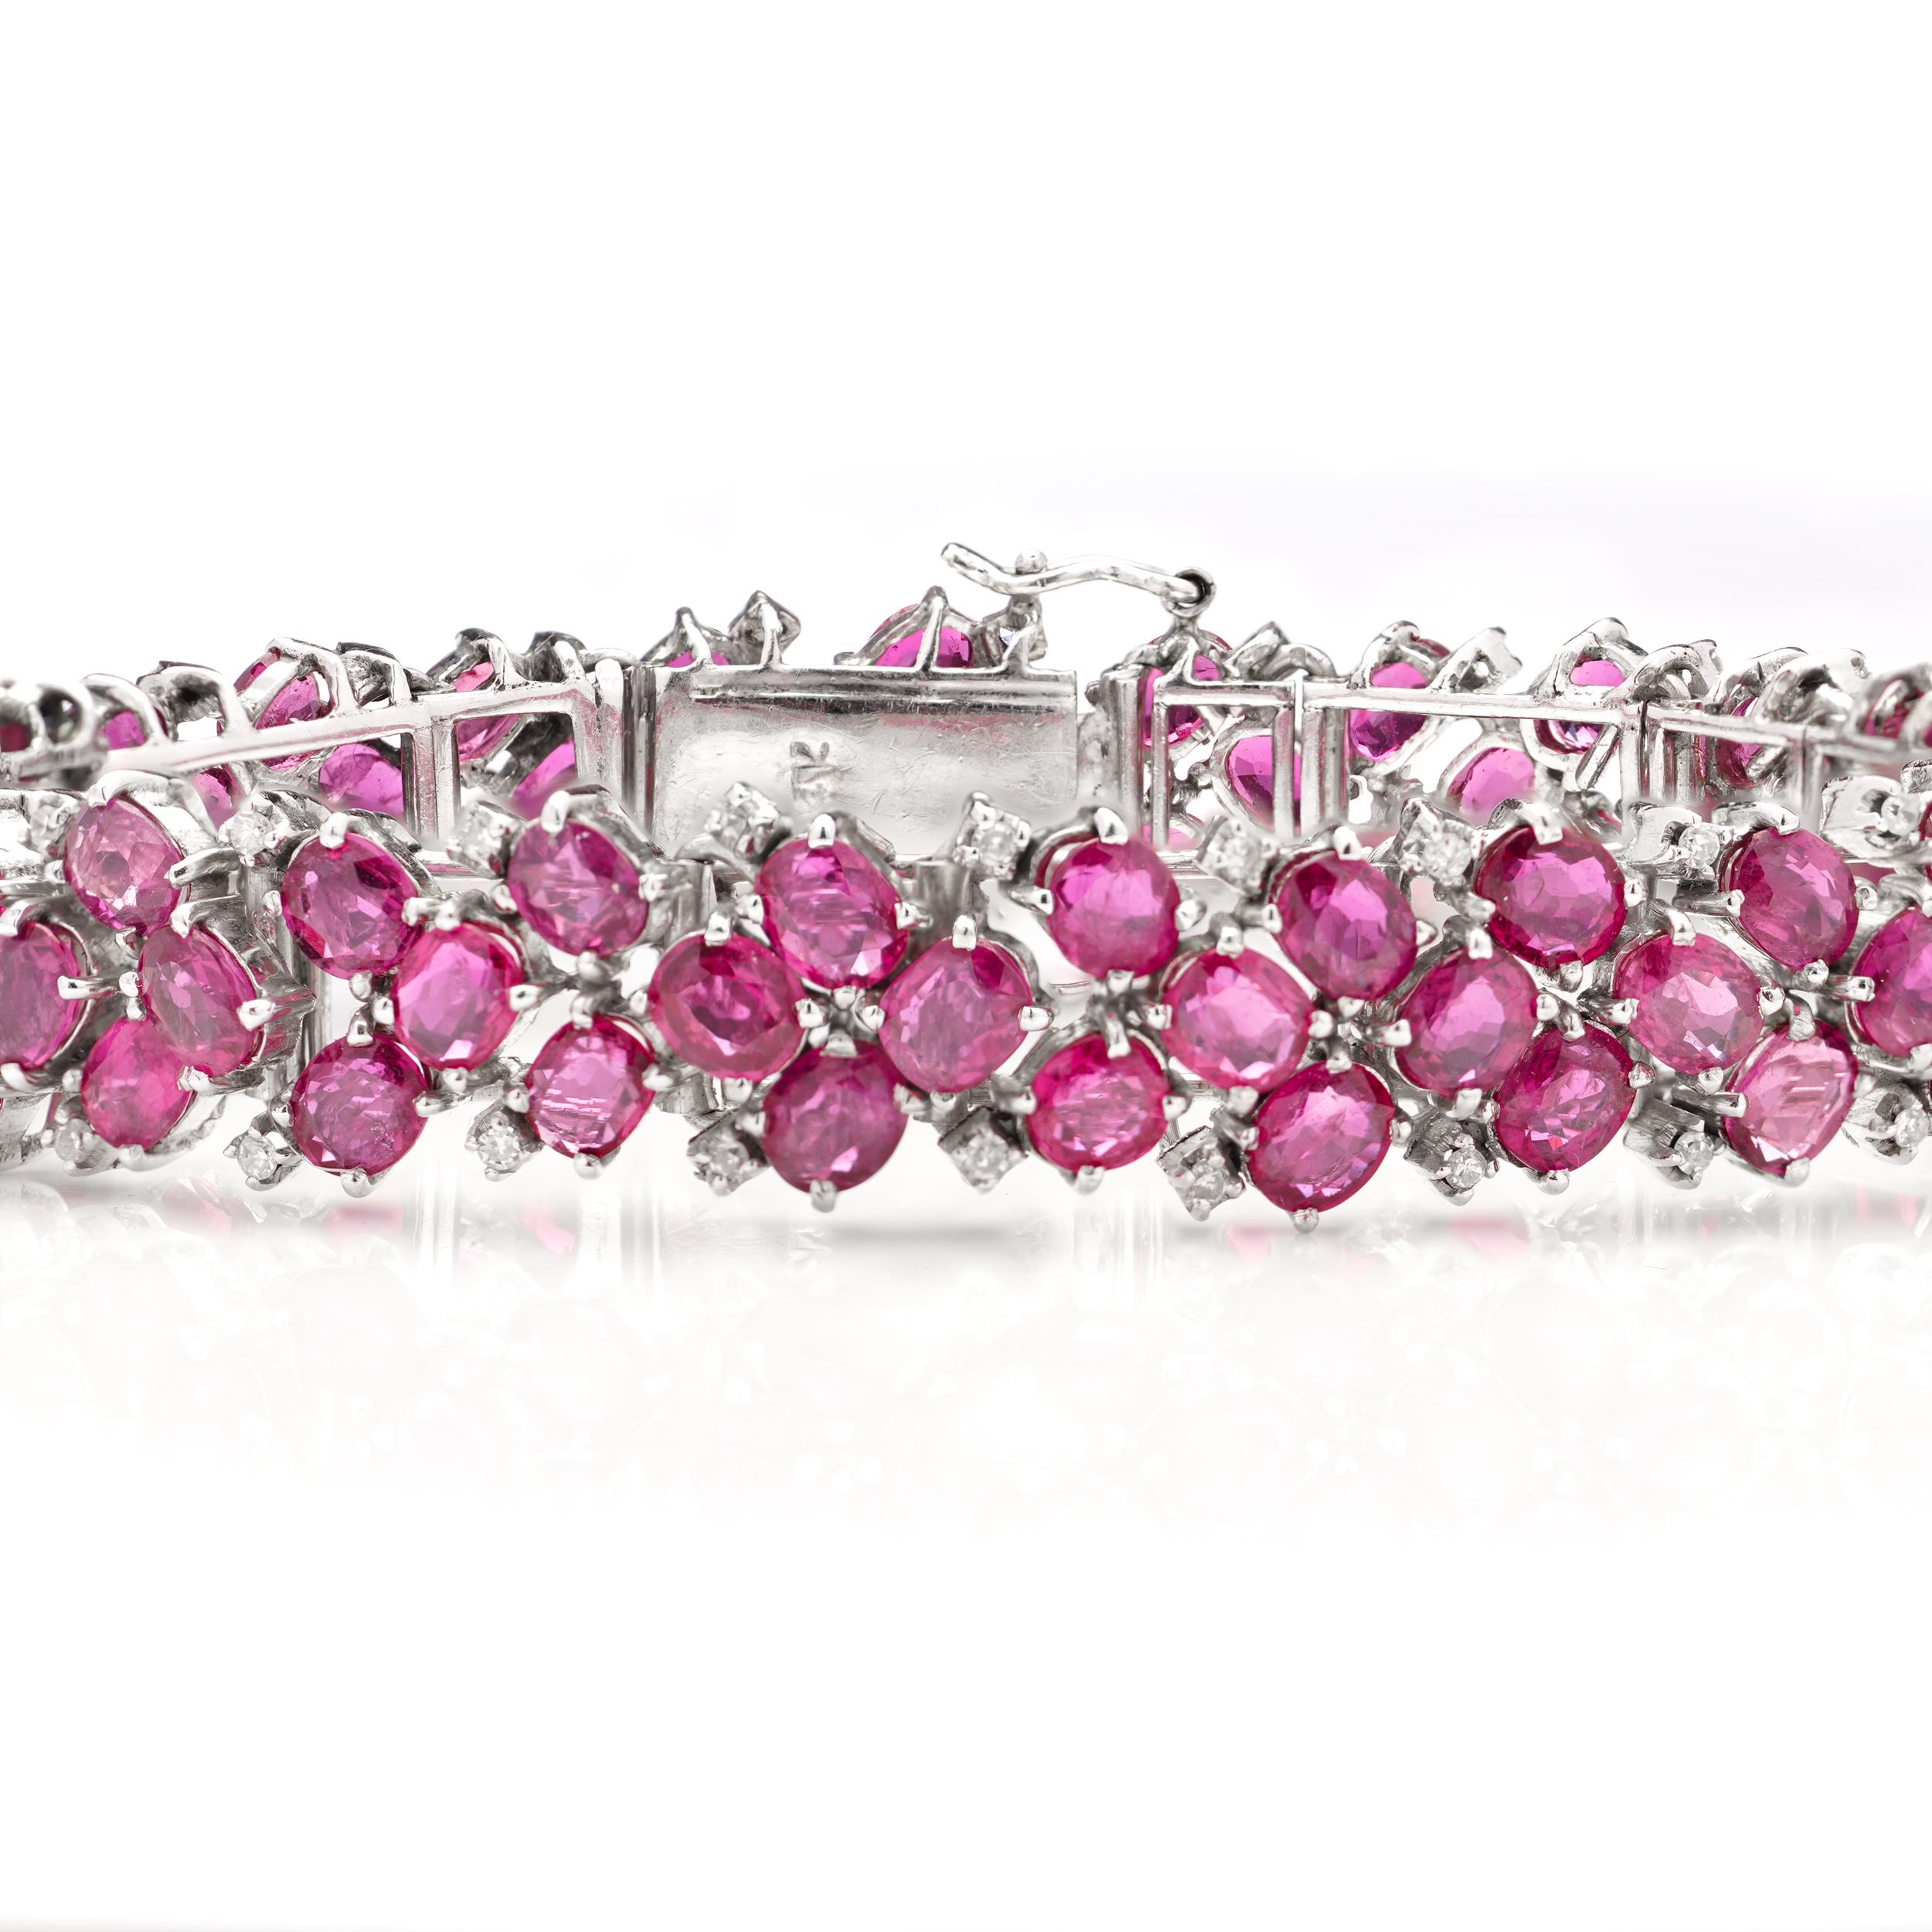 14kt. white gold link bracelet set with 22.5 carats of oval faceted rubies  For Sale 2